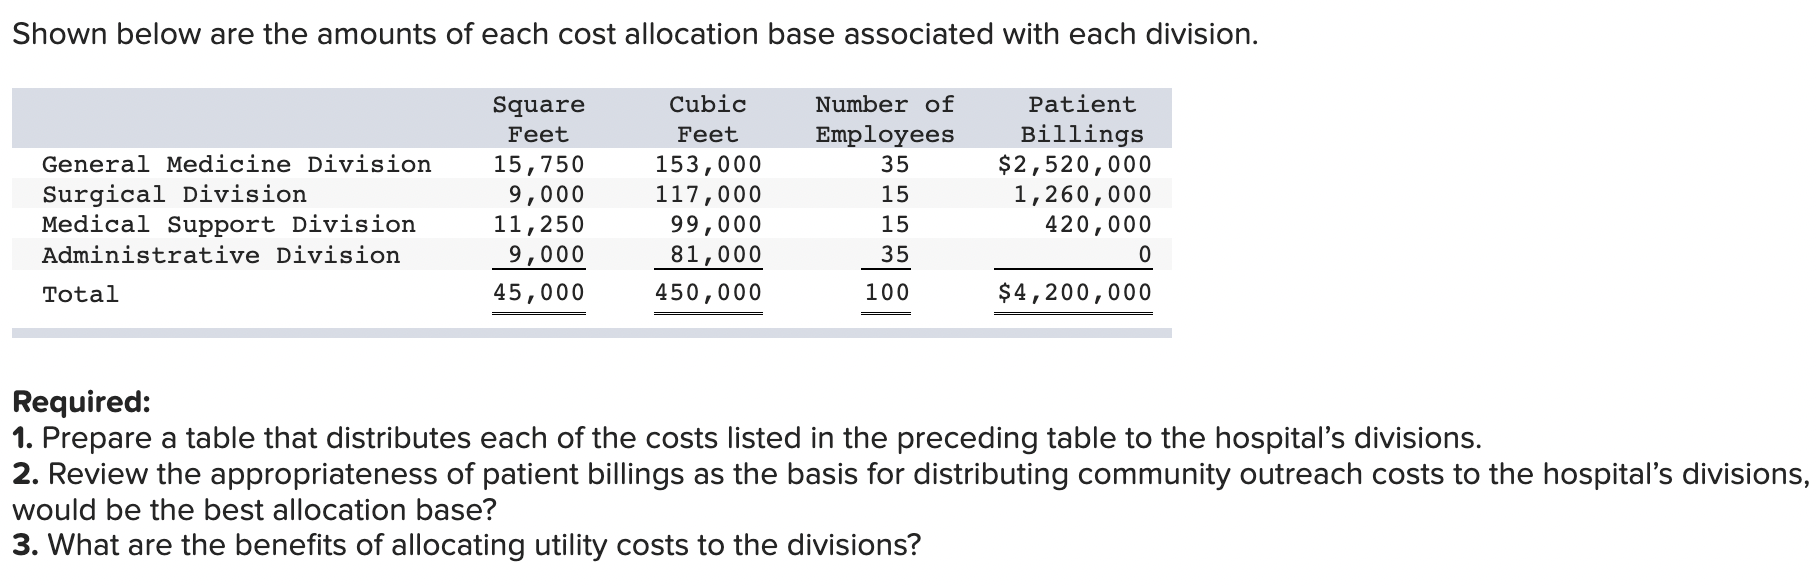 Shown below are the amounts of each cost allocation base associated with each division. General Medicine